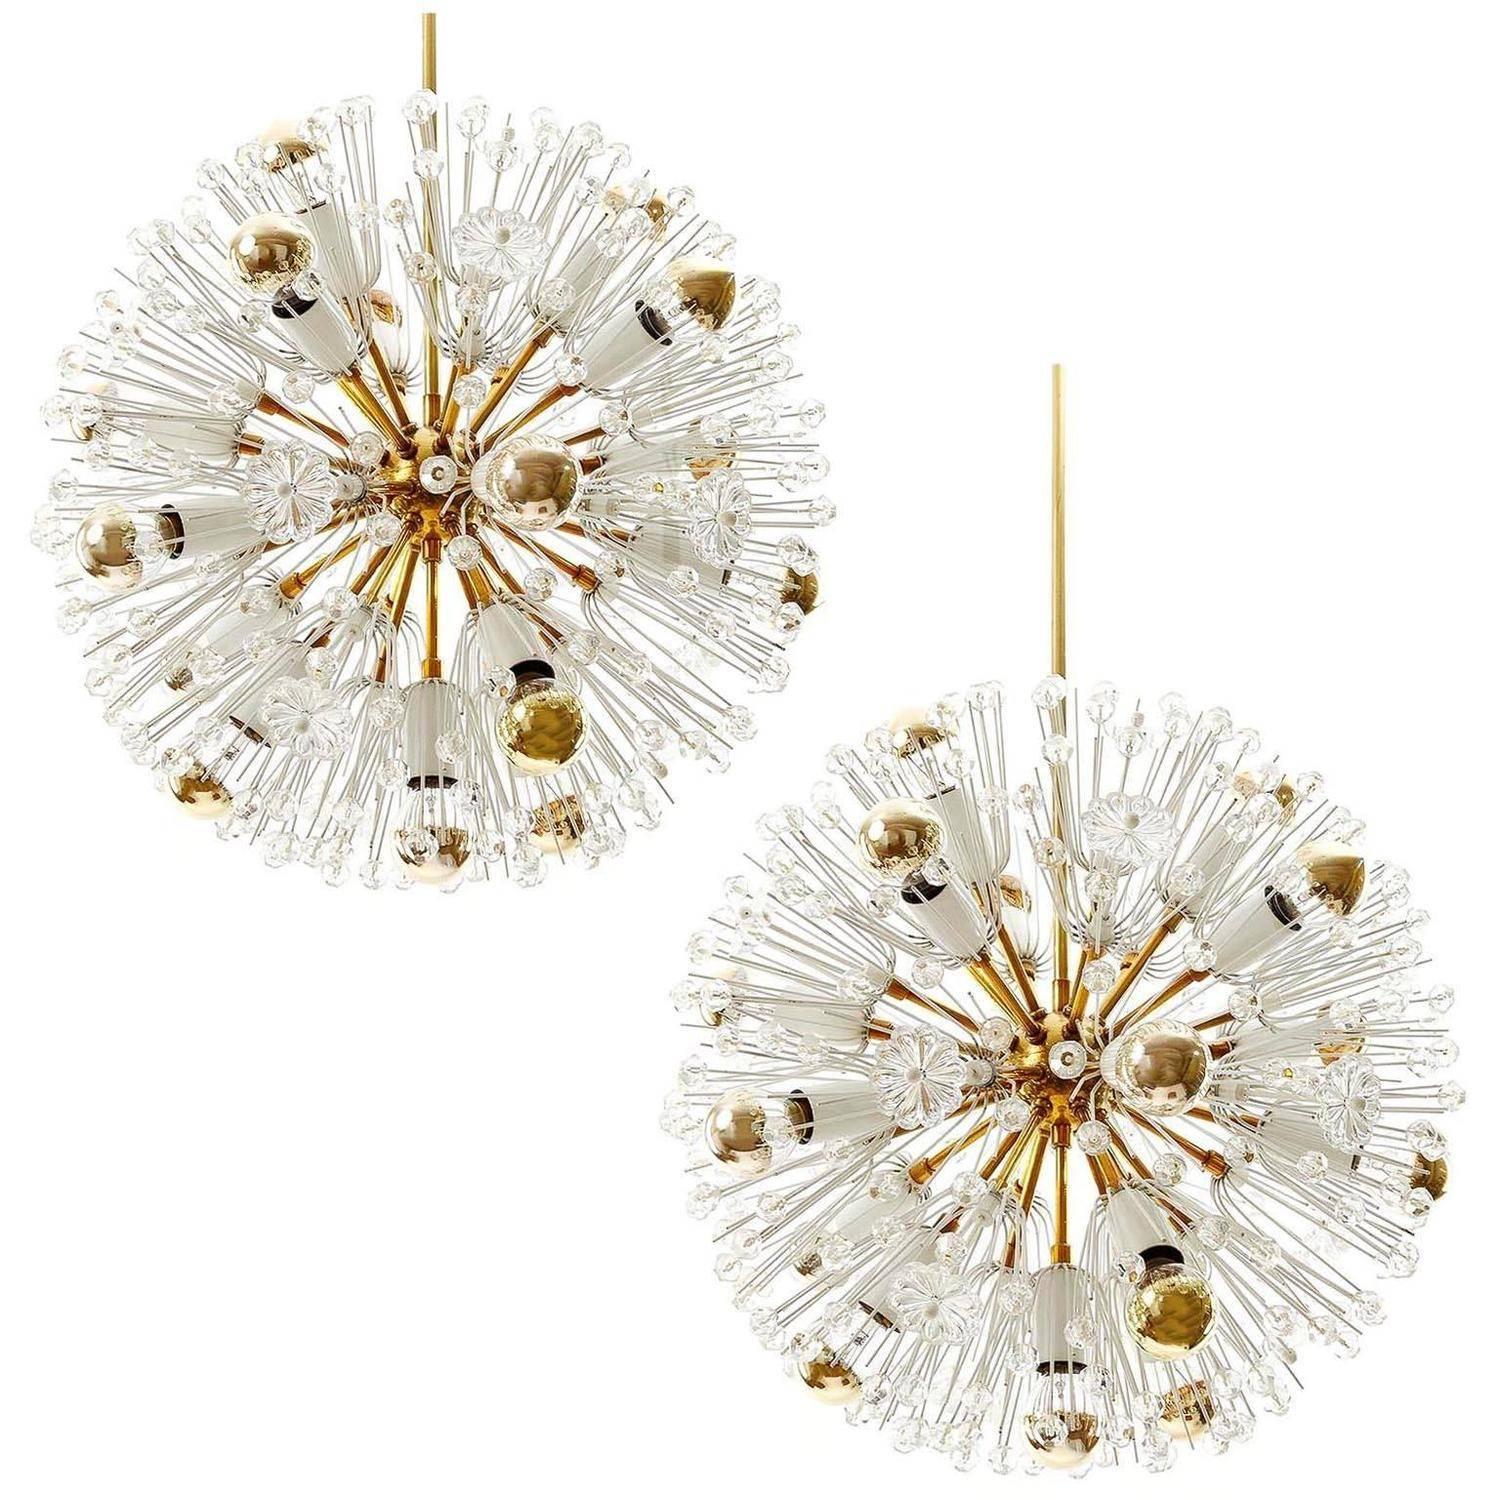 Pair of Brass Glass Sconces by Emil Stejnar for Rupert Nikoll, Vienna, 1950s For Sale 1